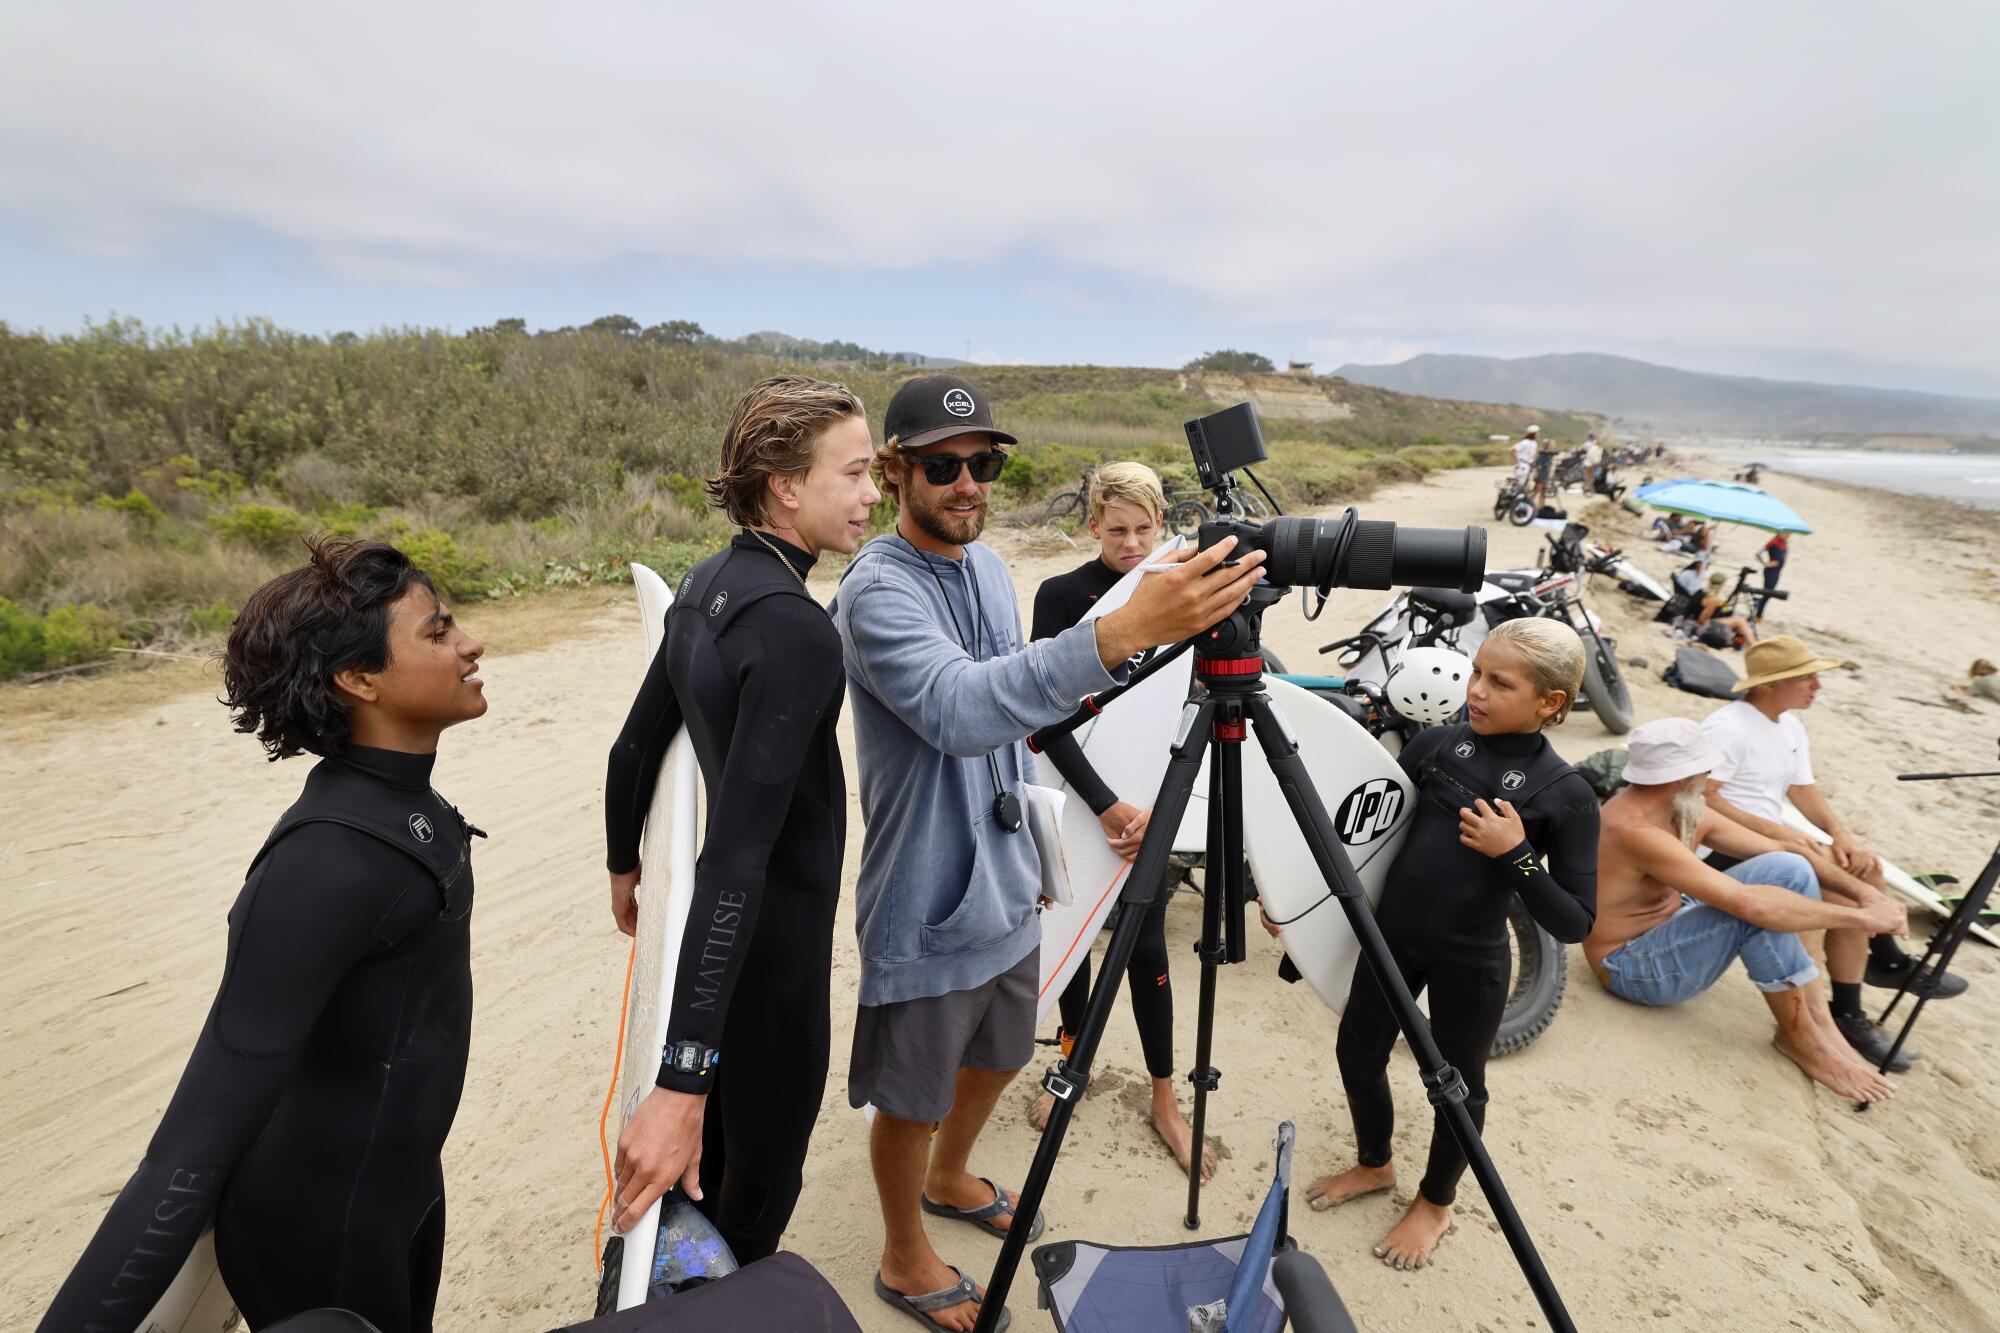 Surf instructor Lucas Taub, center, reviews performance videos with young surfers in San Clemente.